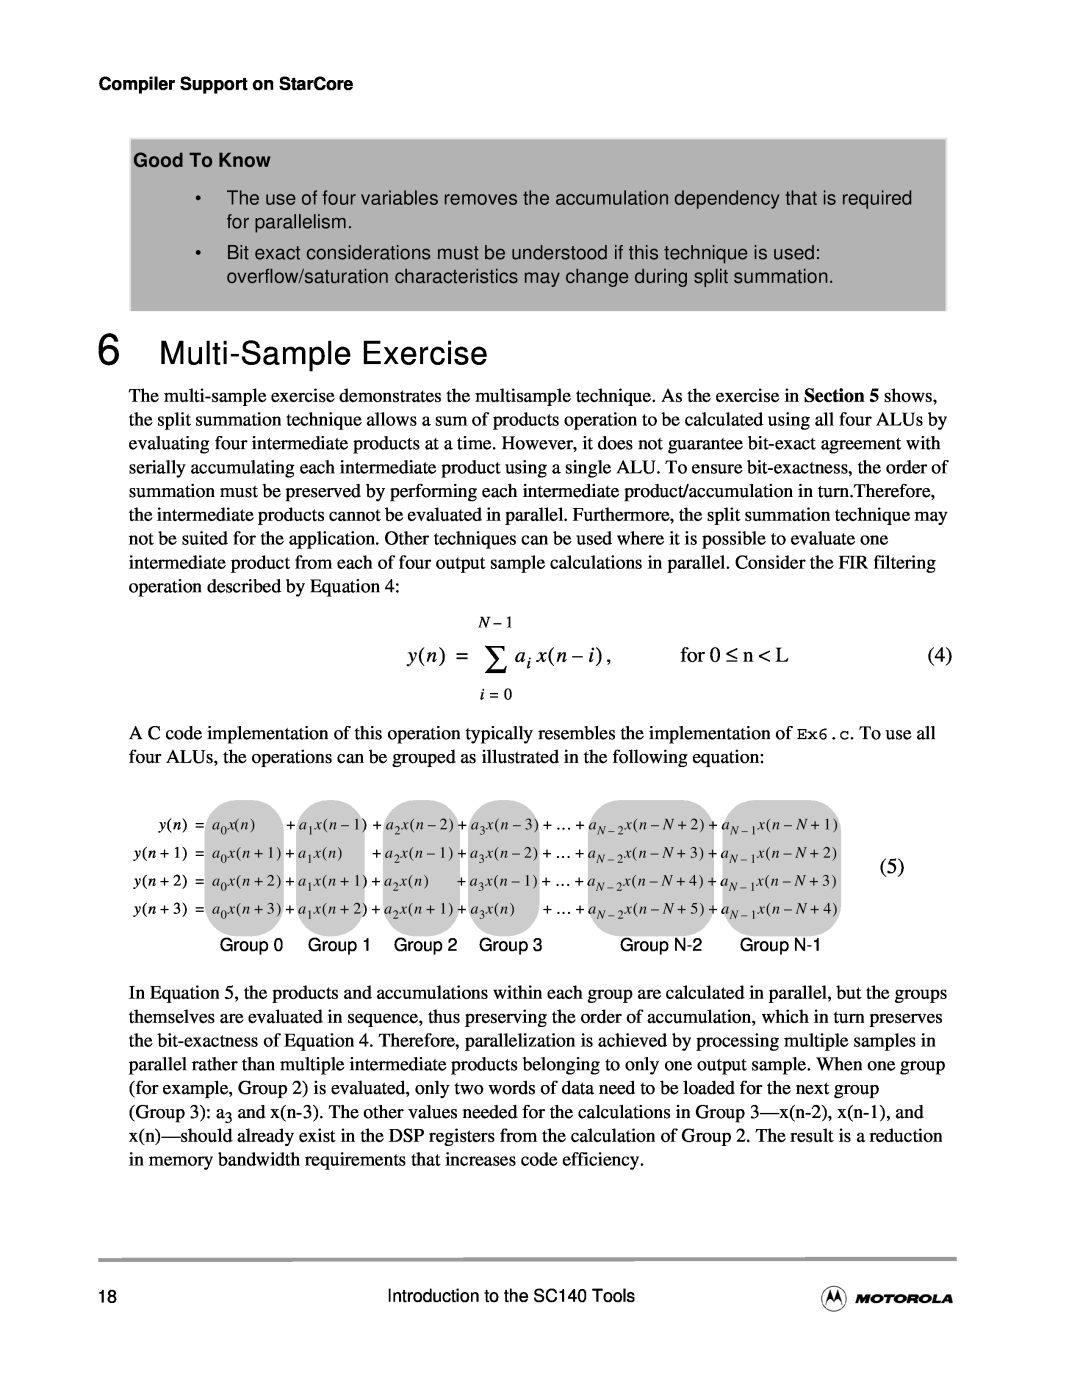 Motorola SC140 user manual Multi-Sample Exercise, y n = ∑ a i x n, for 0 ≤ n L, Good To Know 